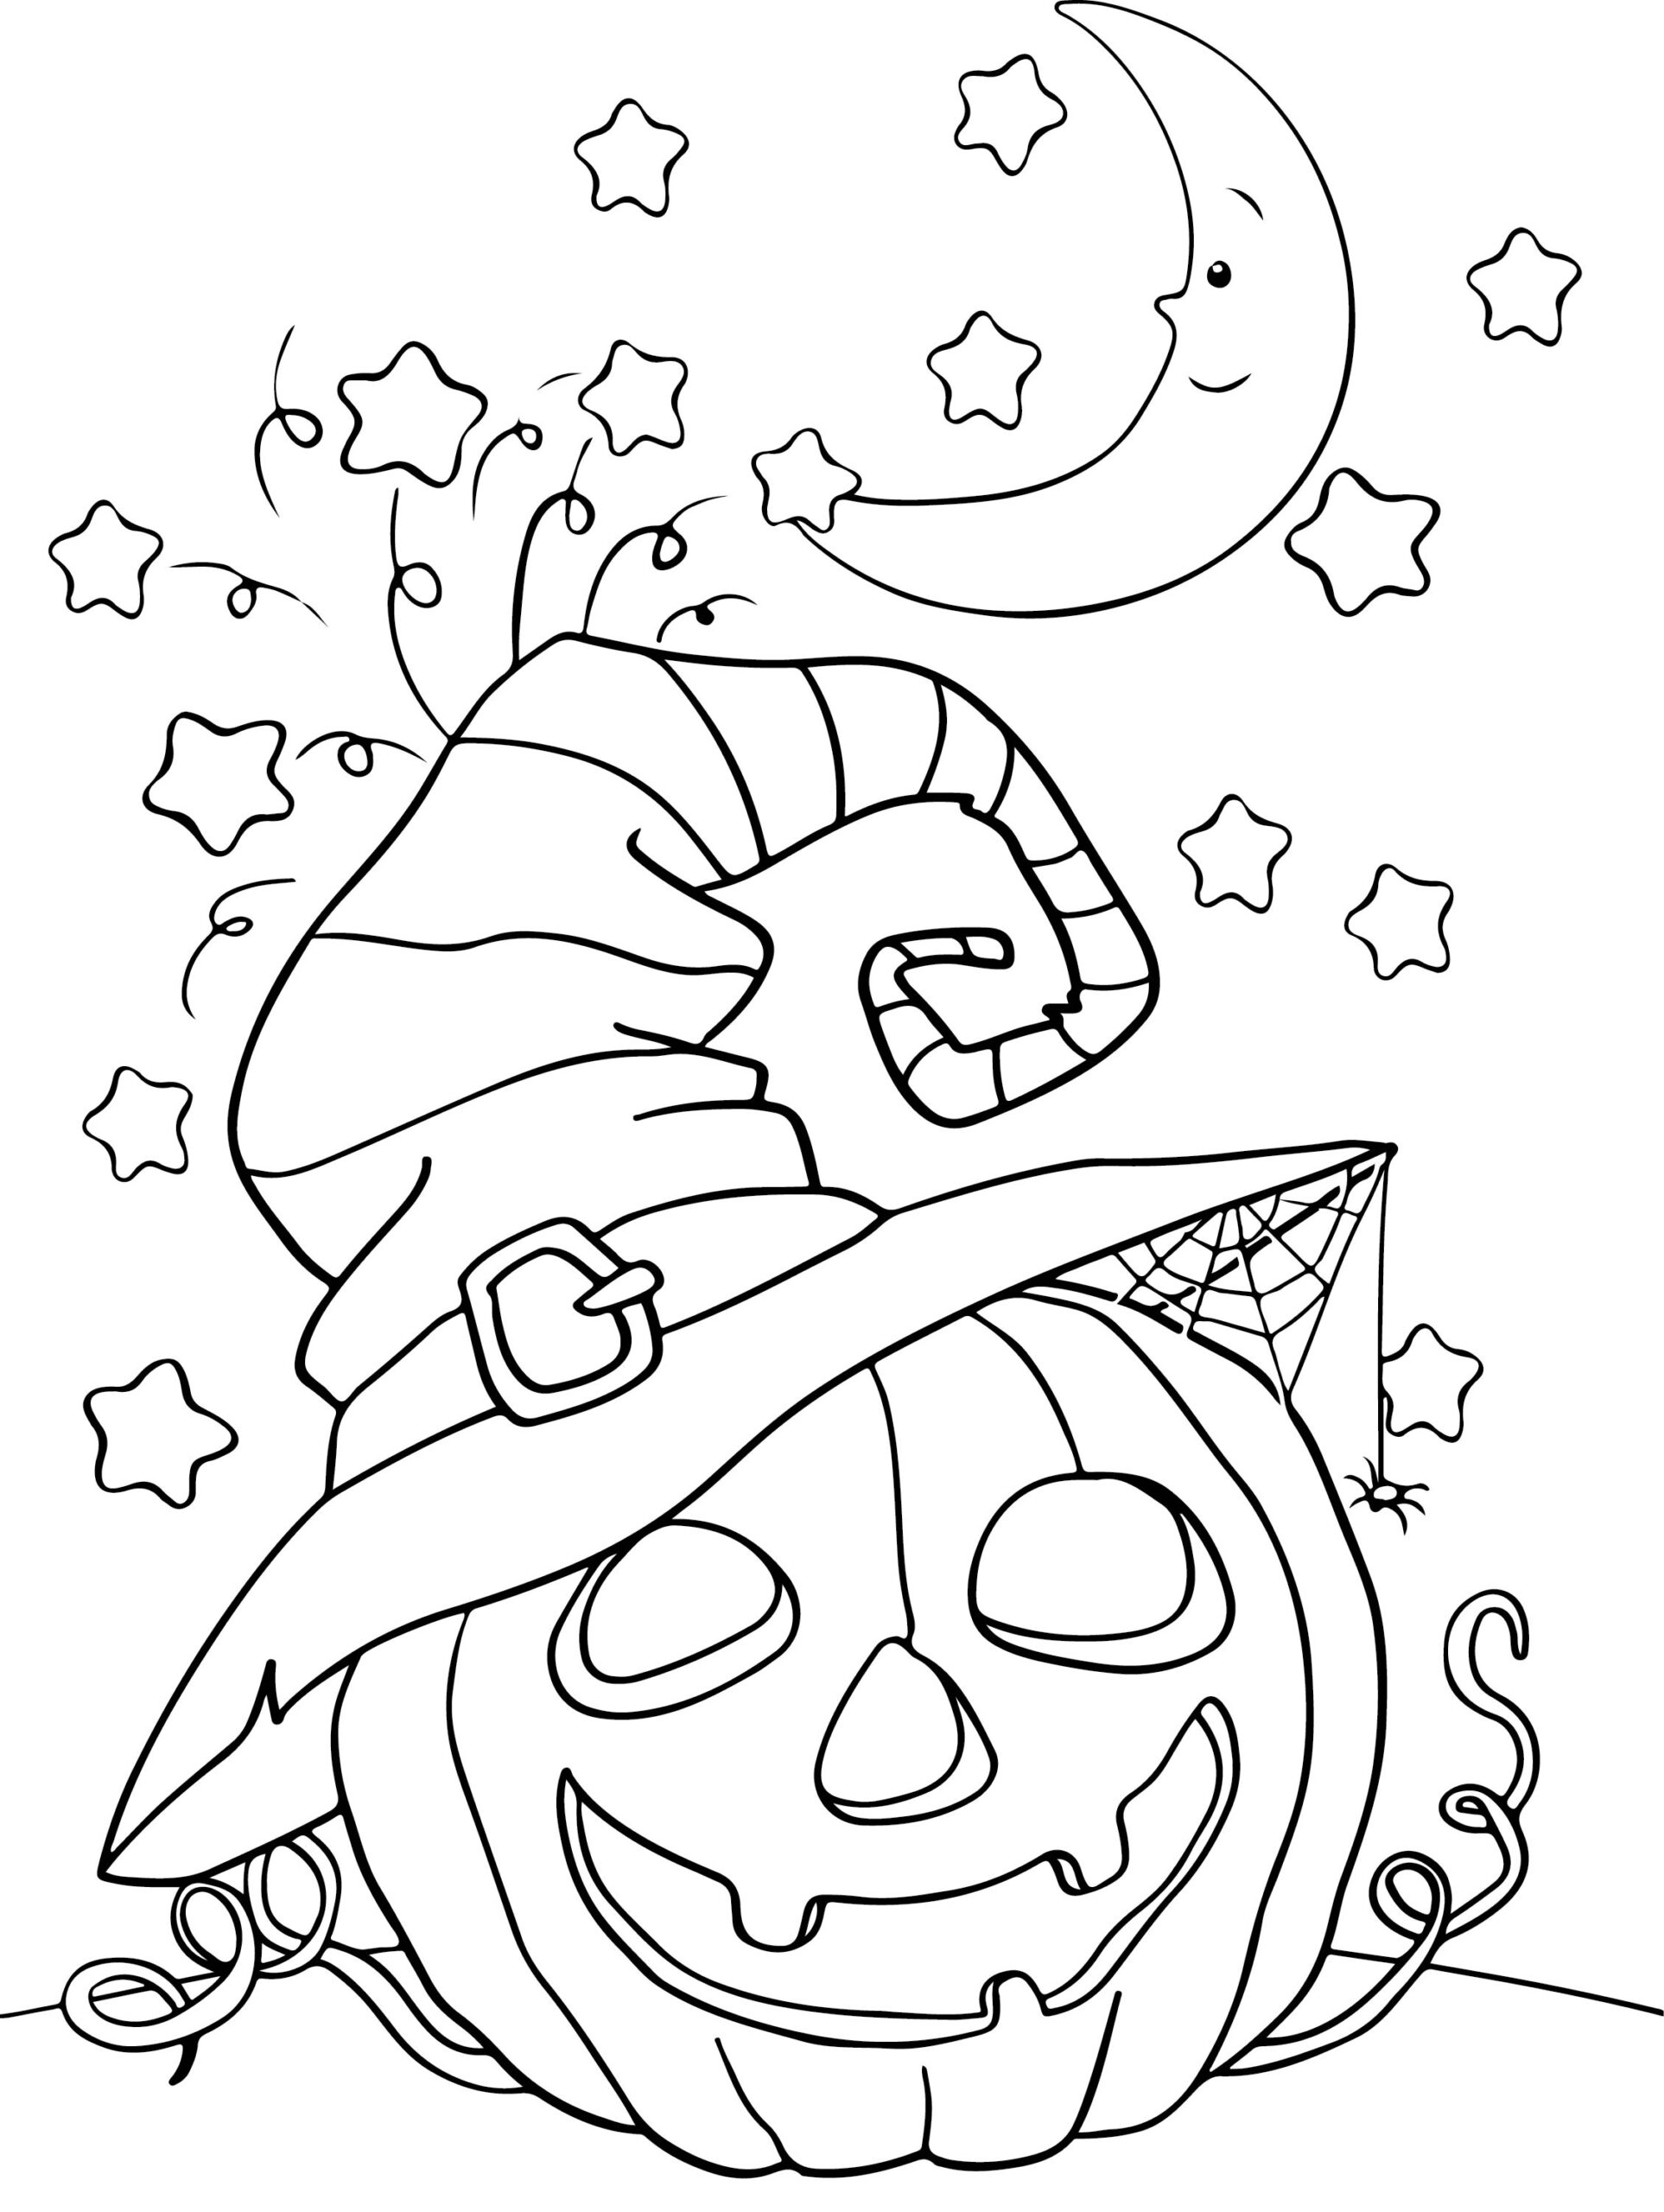 printable-halloween-pictures-to-colour-printable-pictures